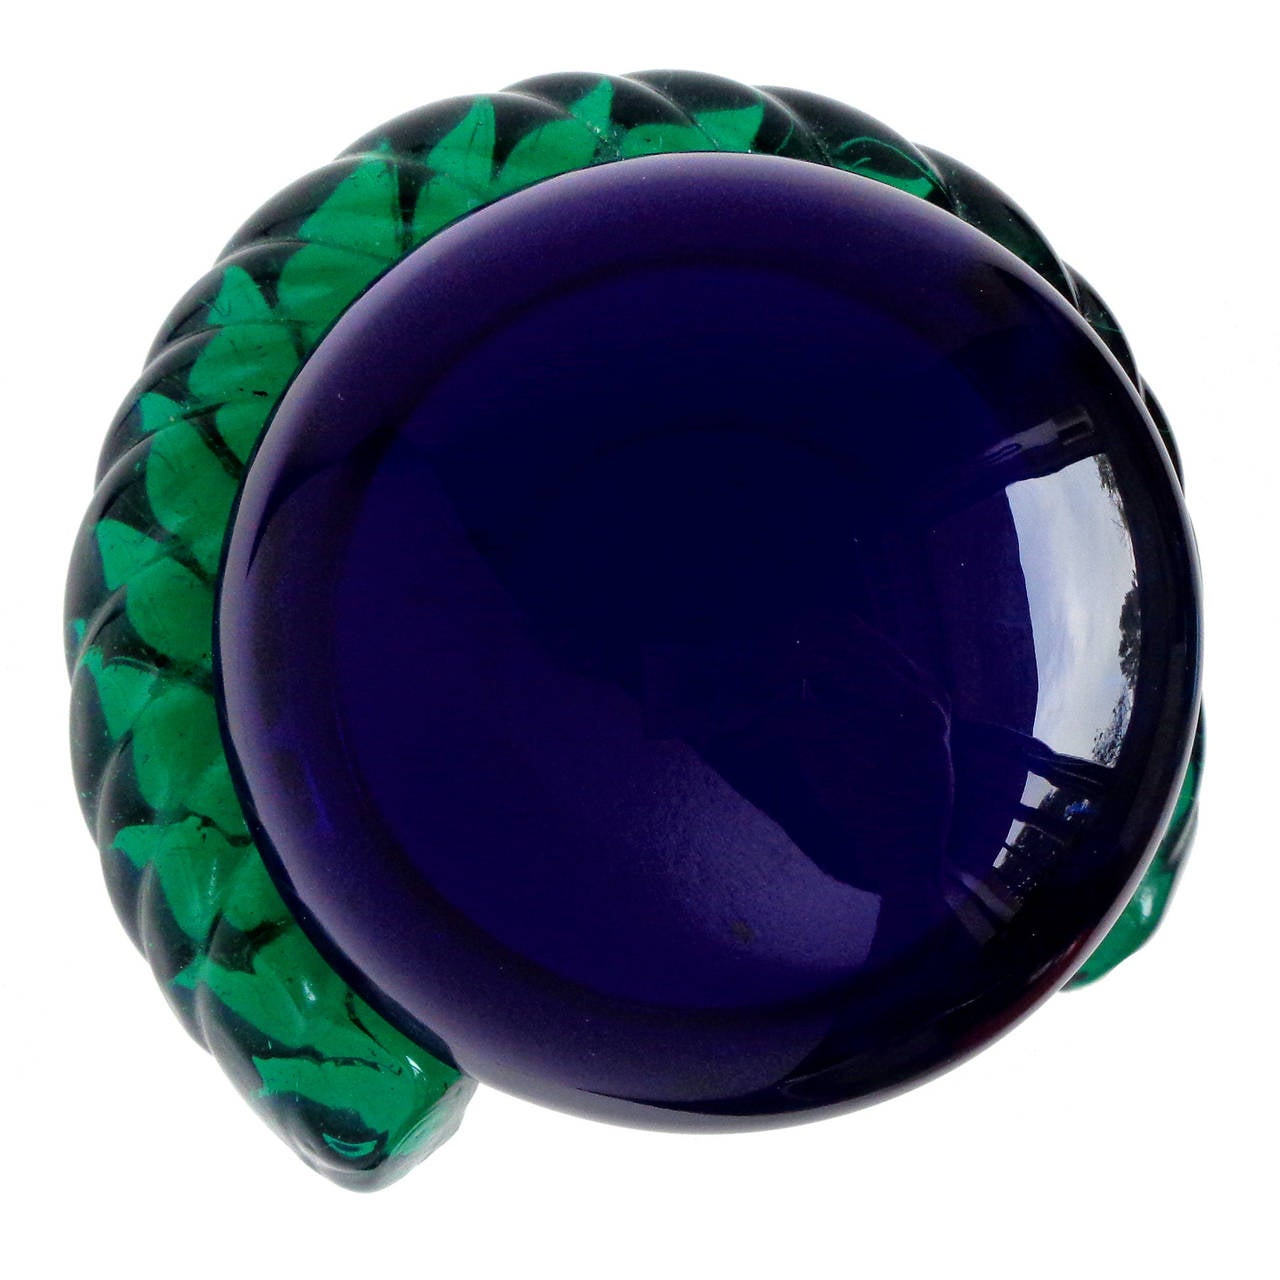 FREE Shipping Worldwide! See details below description.

Excellent Murano hand blown cobalt blue and green rope art glass nautical paperweight. Documented to designer Archimede Seguso, and fully signed. Perfect for the nautical / marine collector.